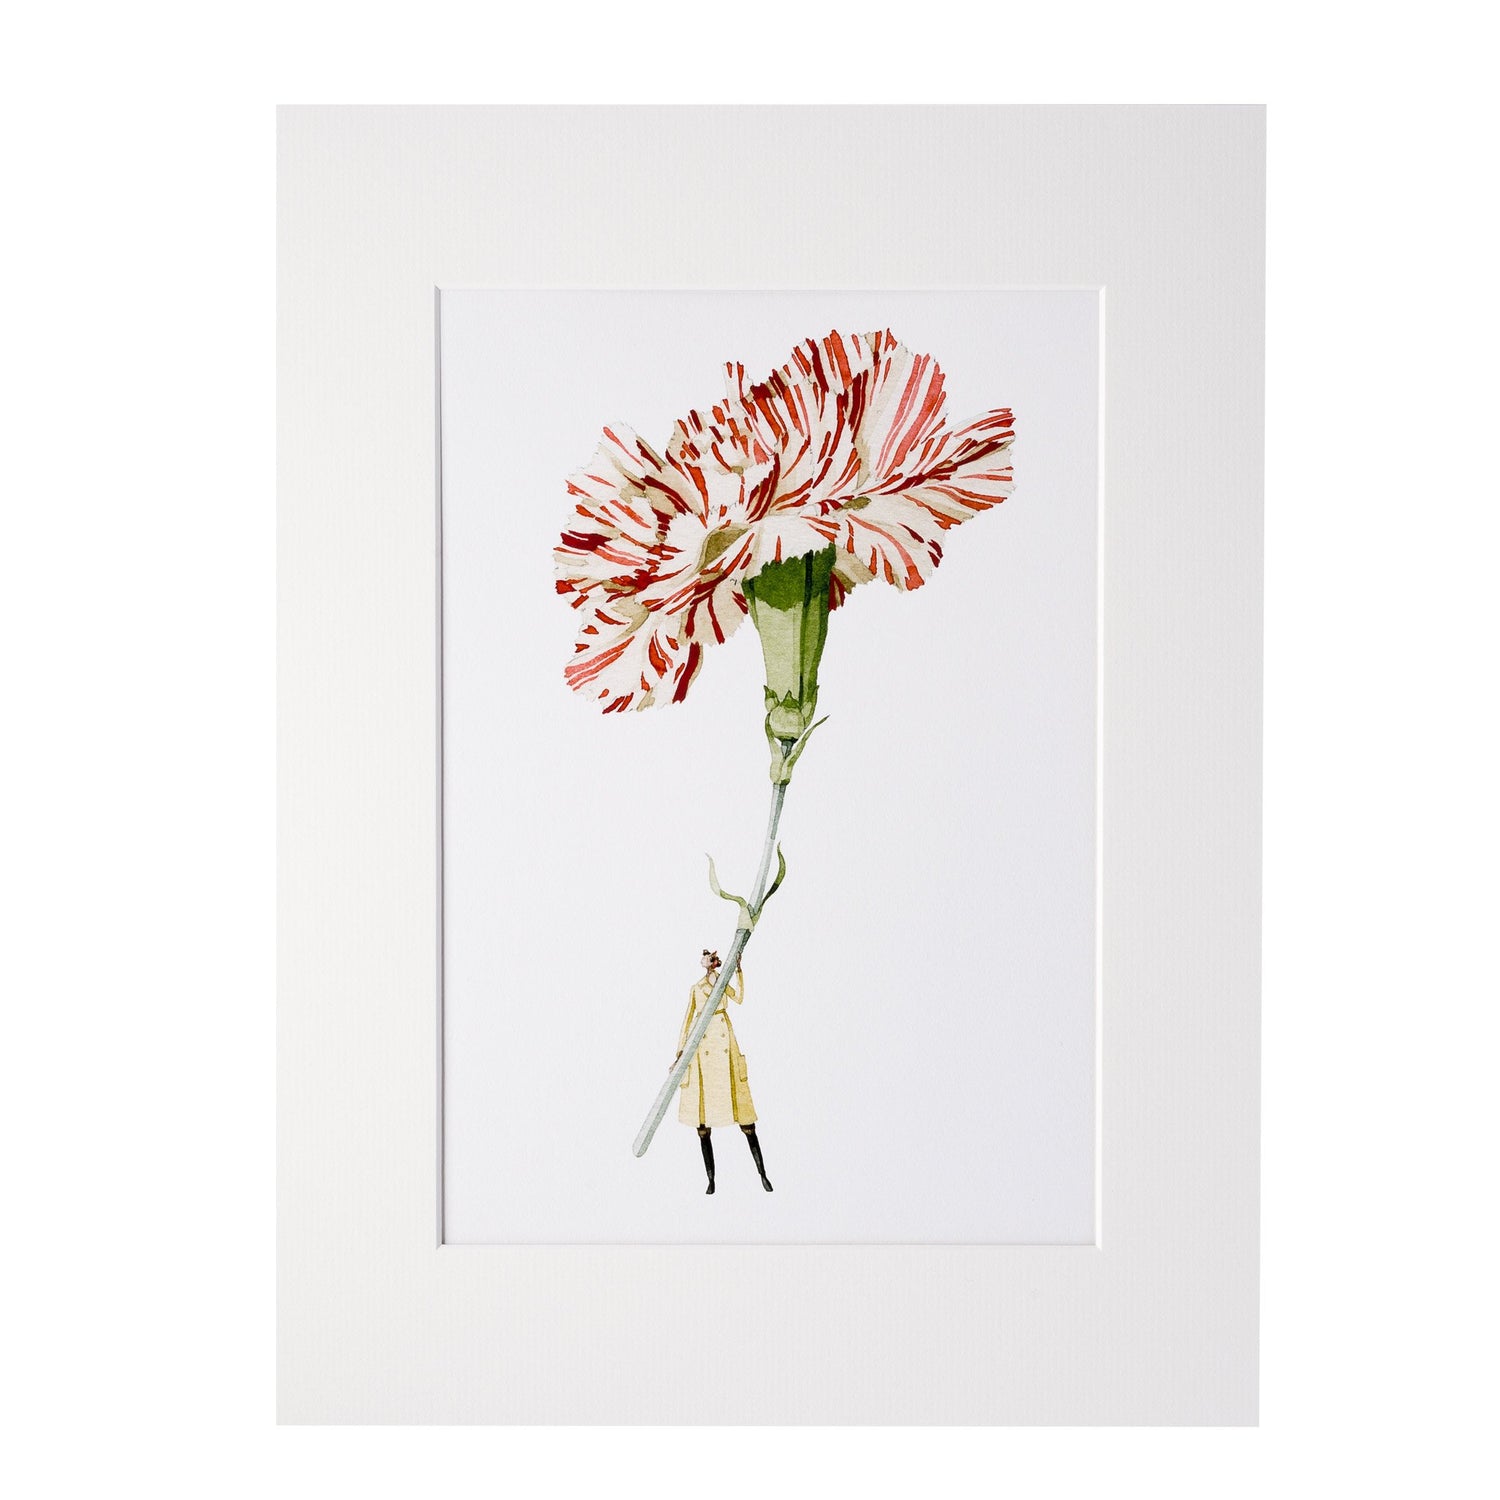 giclee print, mounted print, print, carnation, illustration, made in england, flowers, archival paper, art print